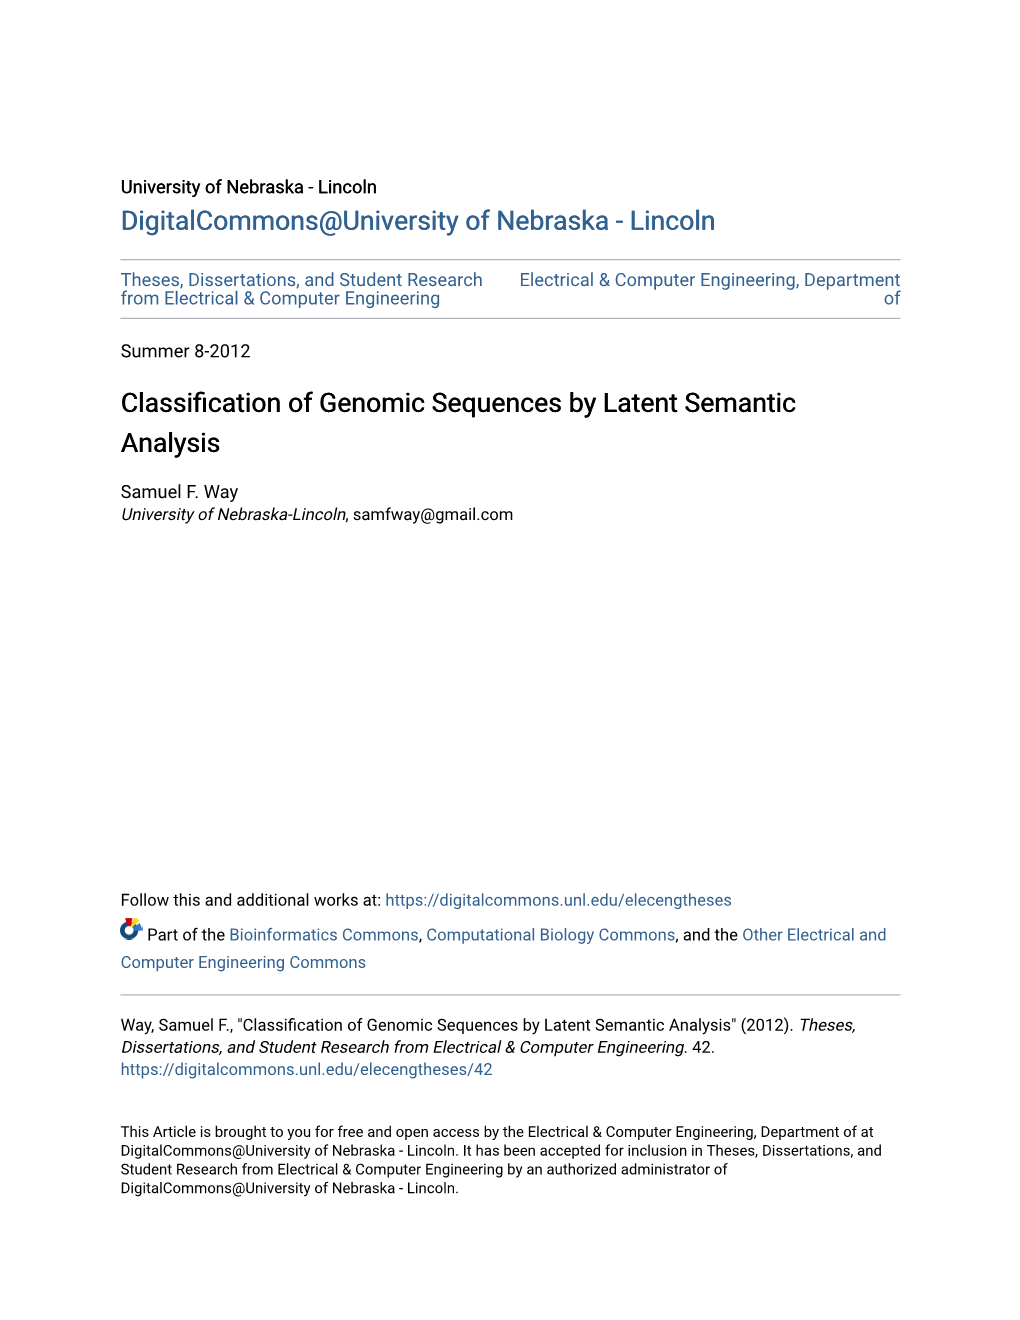 Classification of Genomic Sequences by Latent Semantic Analysis